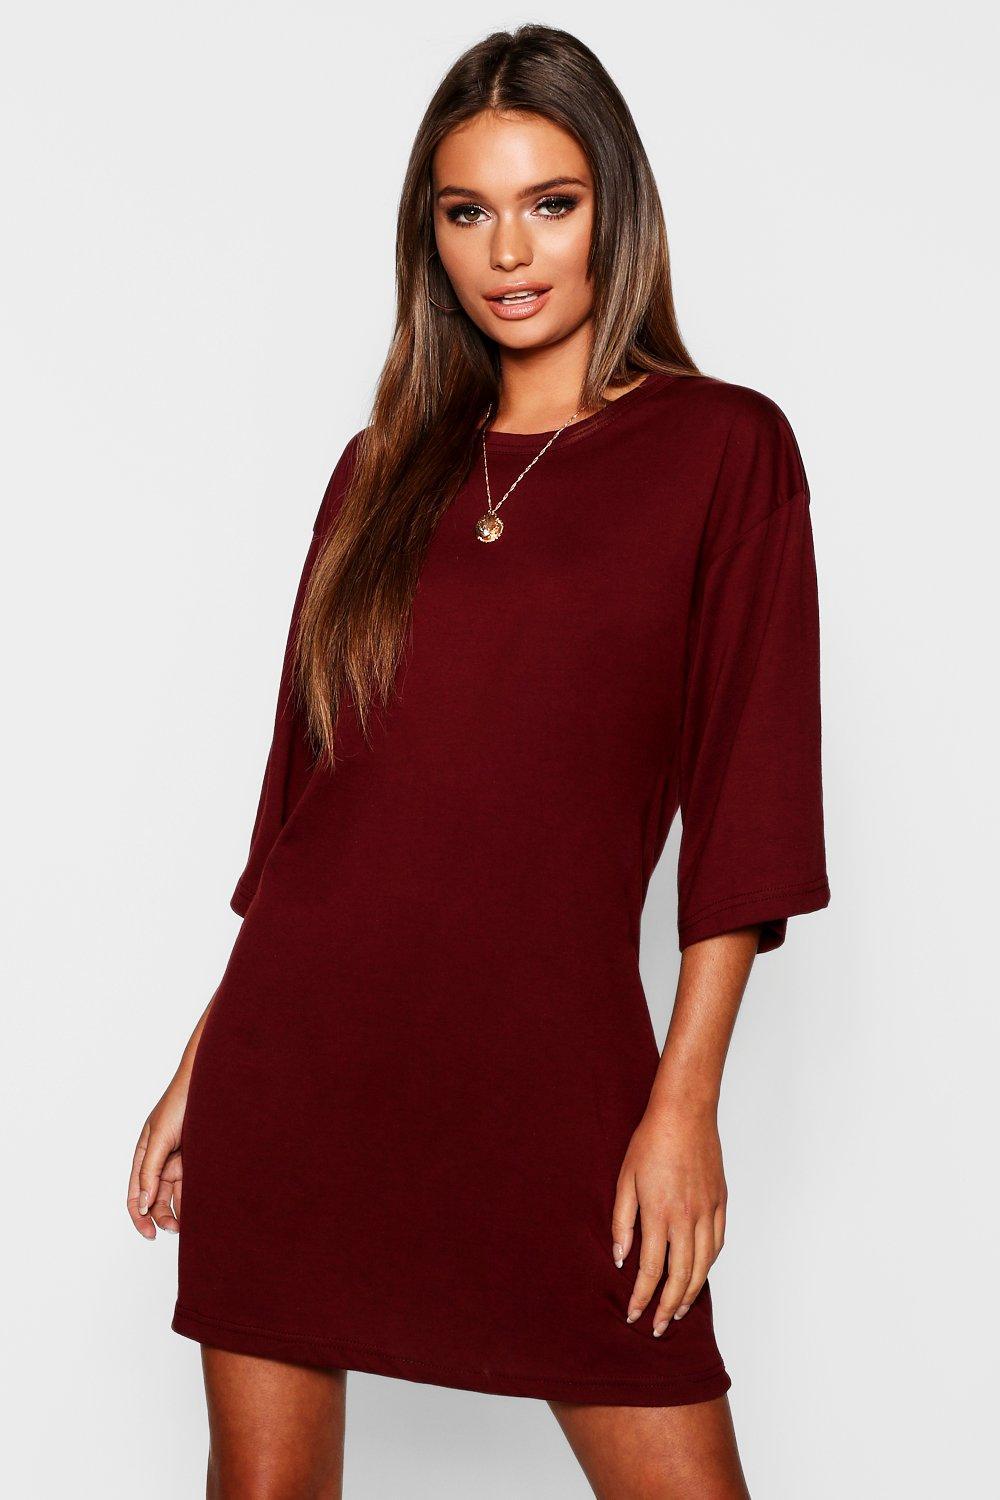 Boohoo Cotton Oversized 3/4 Sleeve T-shirt Dress in Red - Lyst